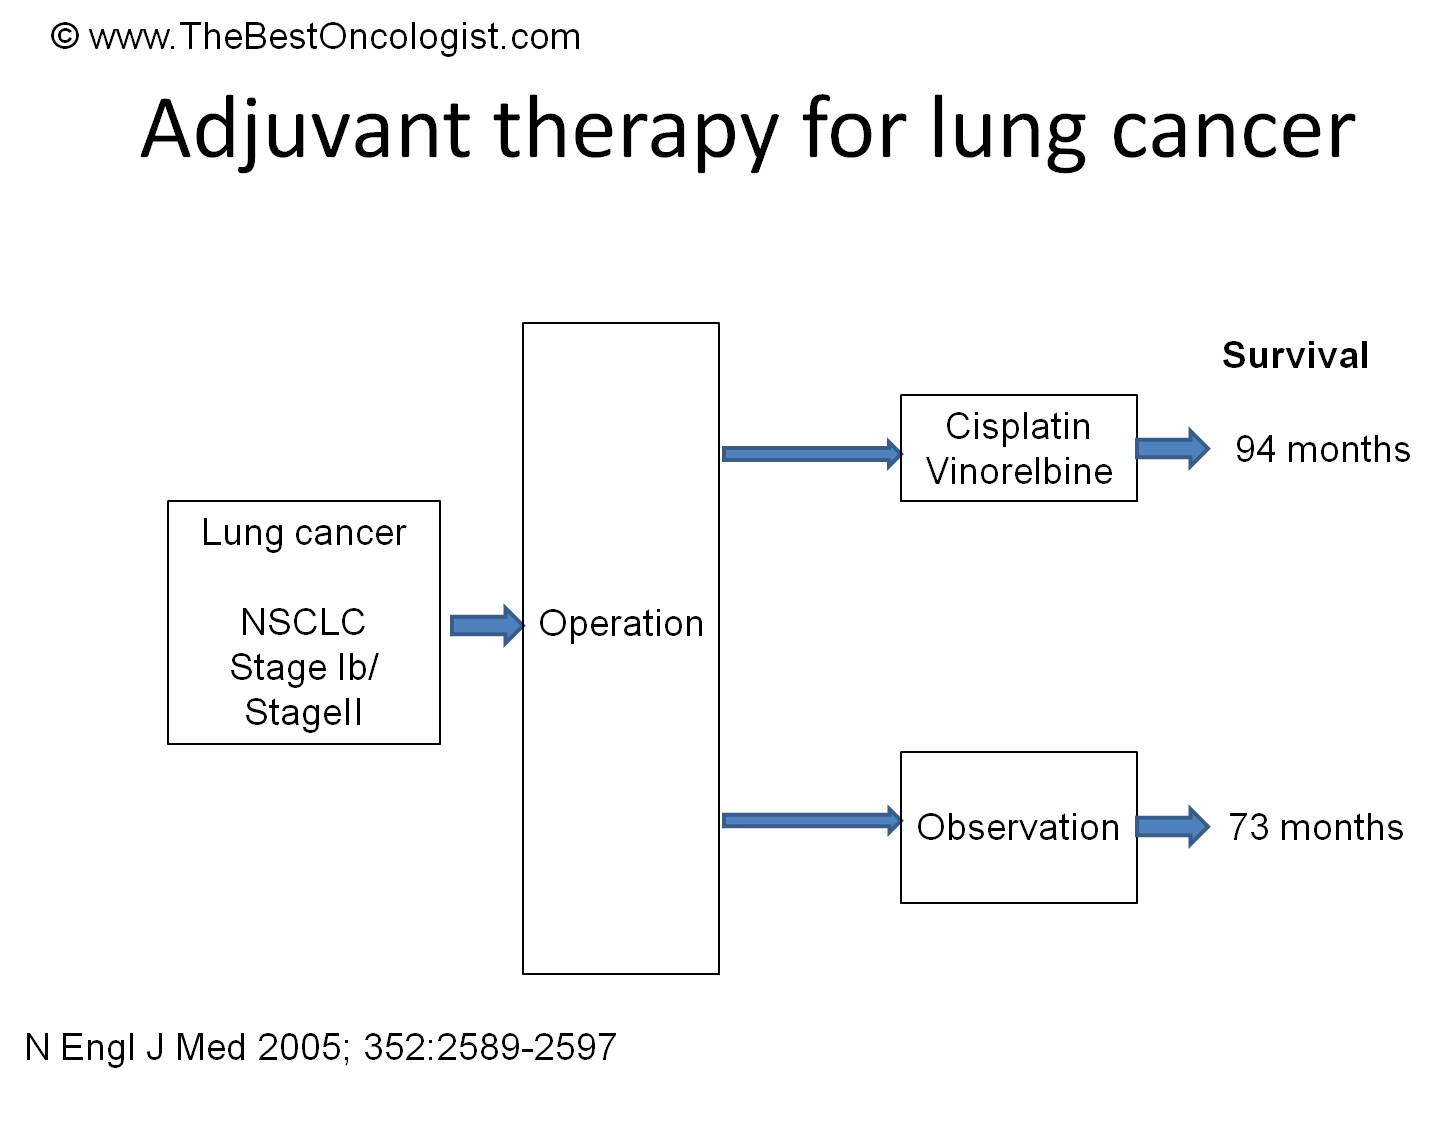  Adjuvant therapy for lung cancer NSCLC